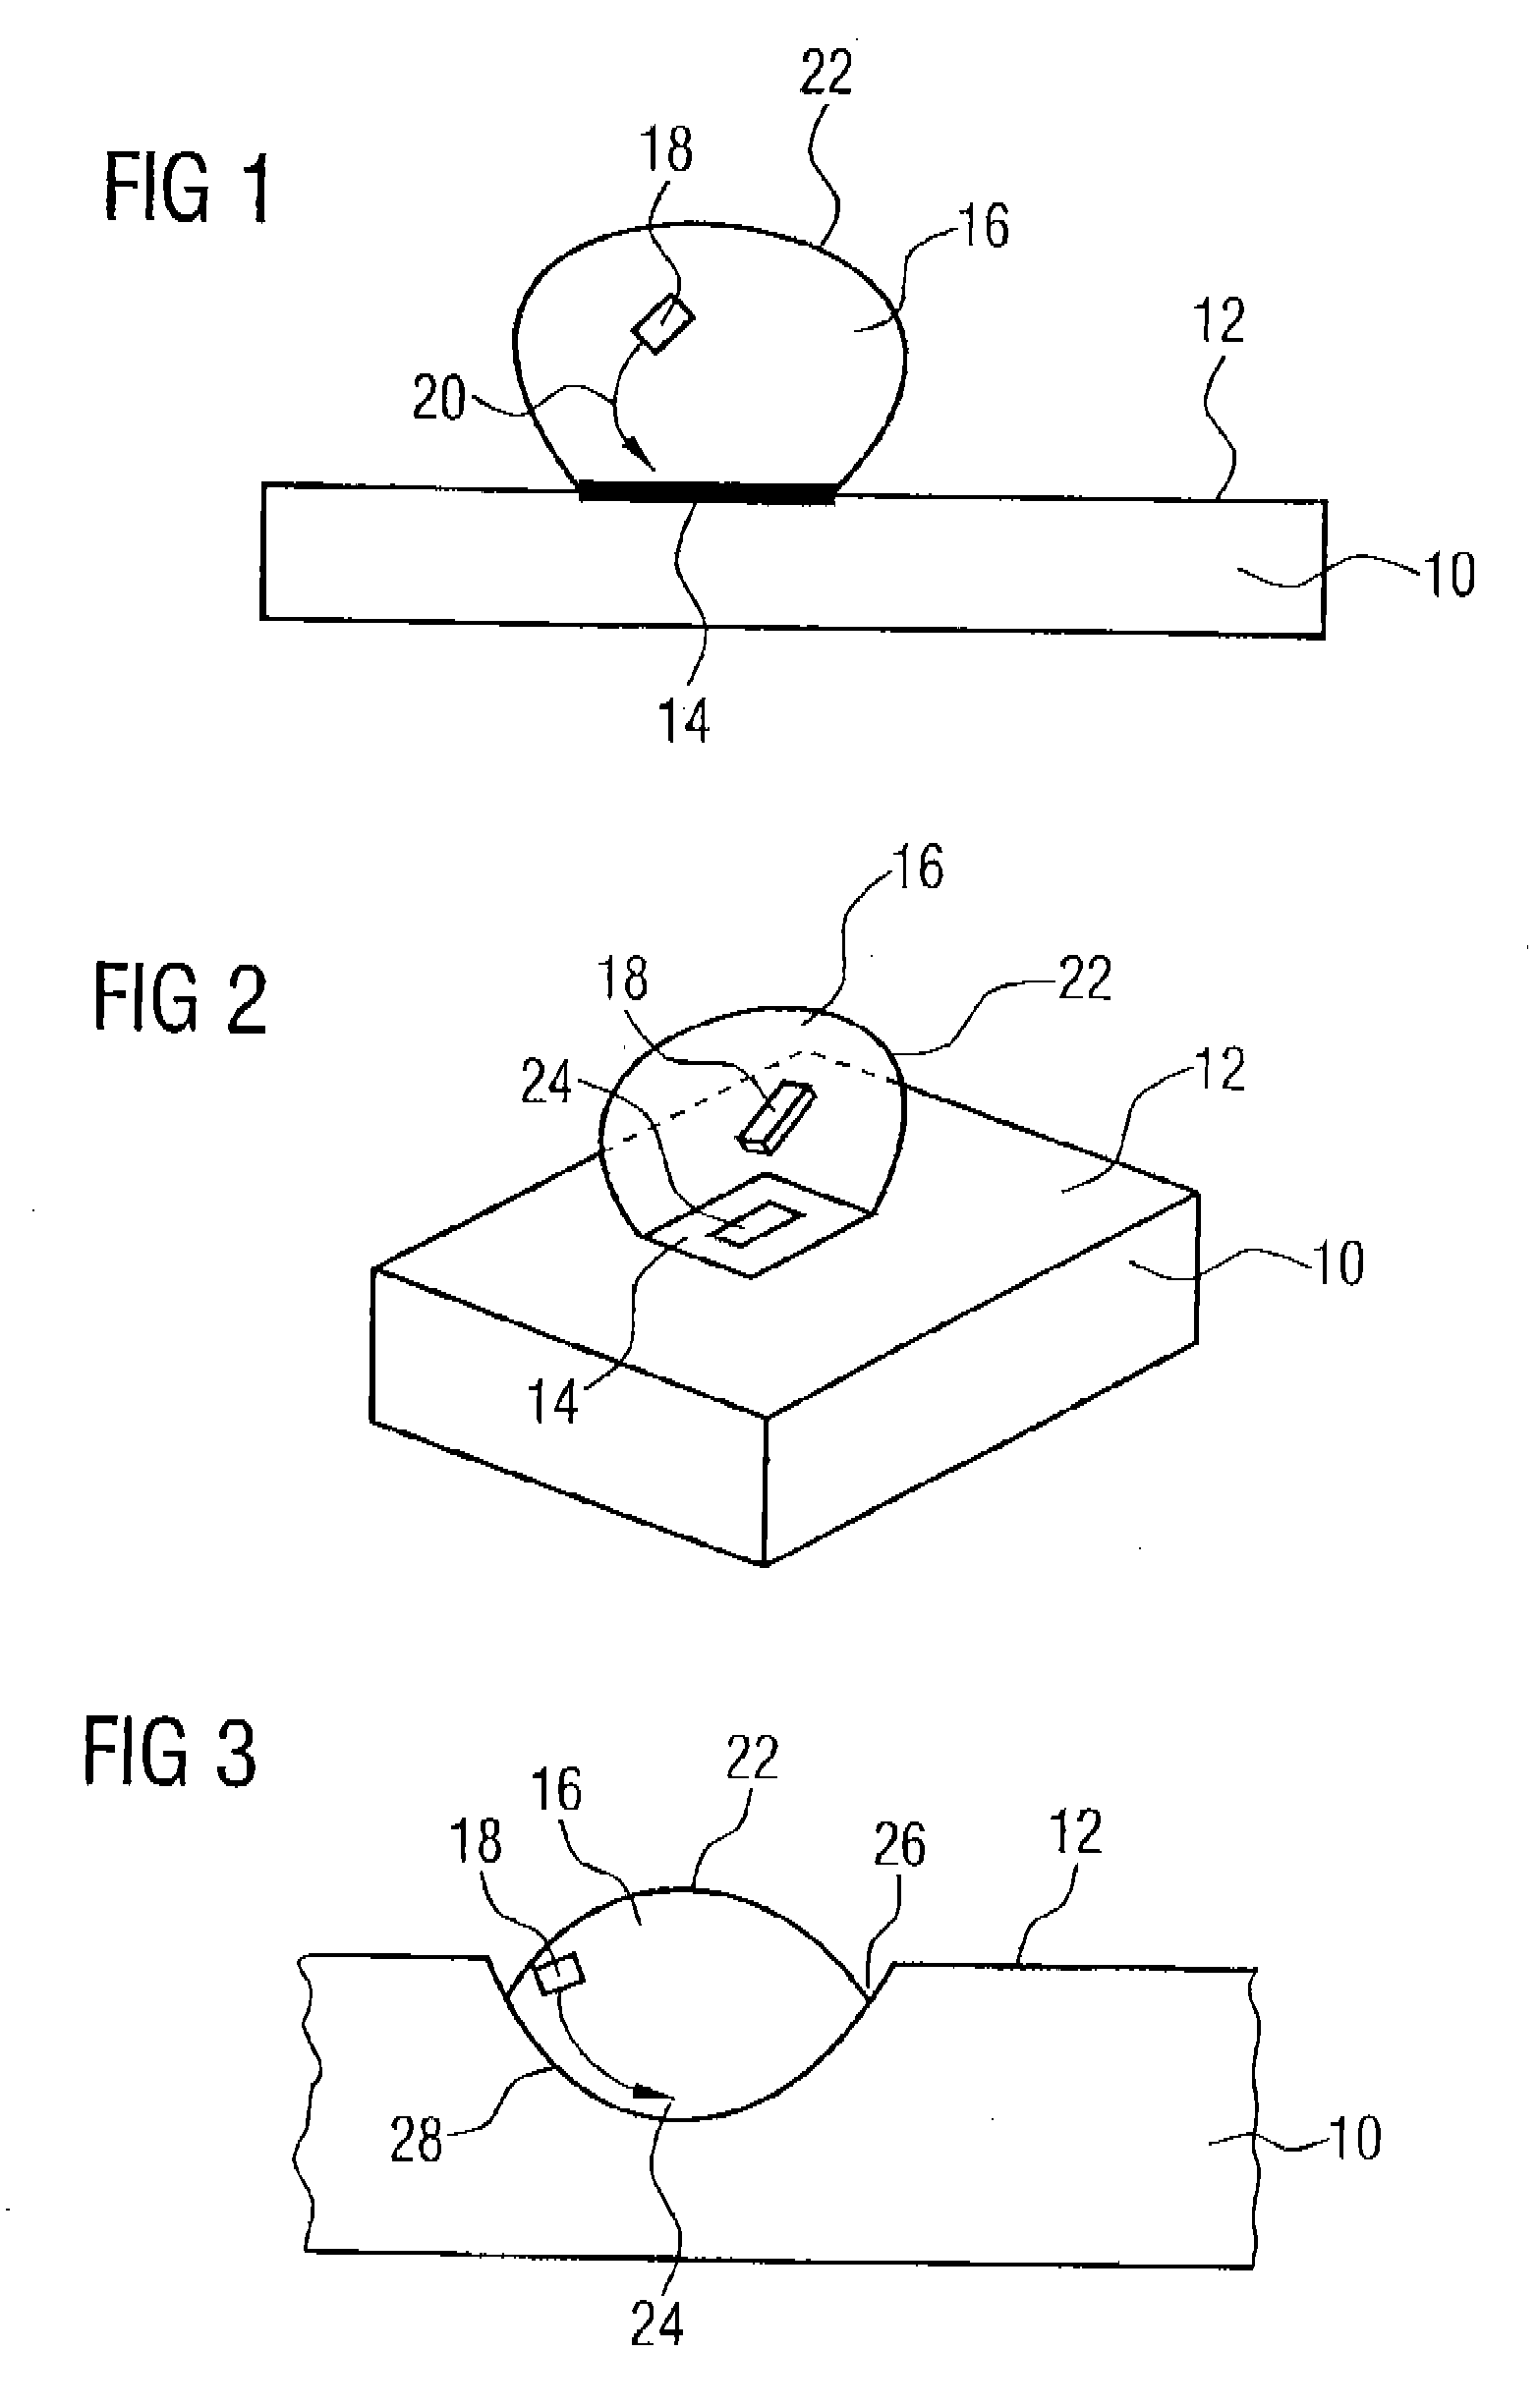 Method and Device for Producing a System Having a Component Applied to a Predetermined Location of a Surface of a Substrate